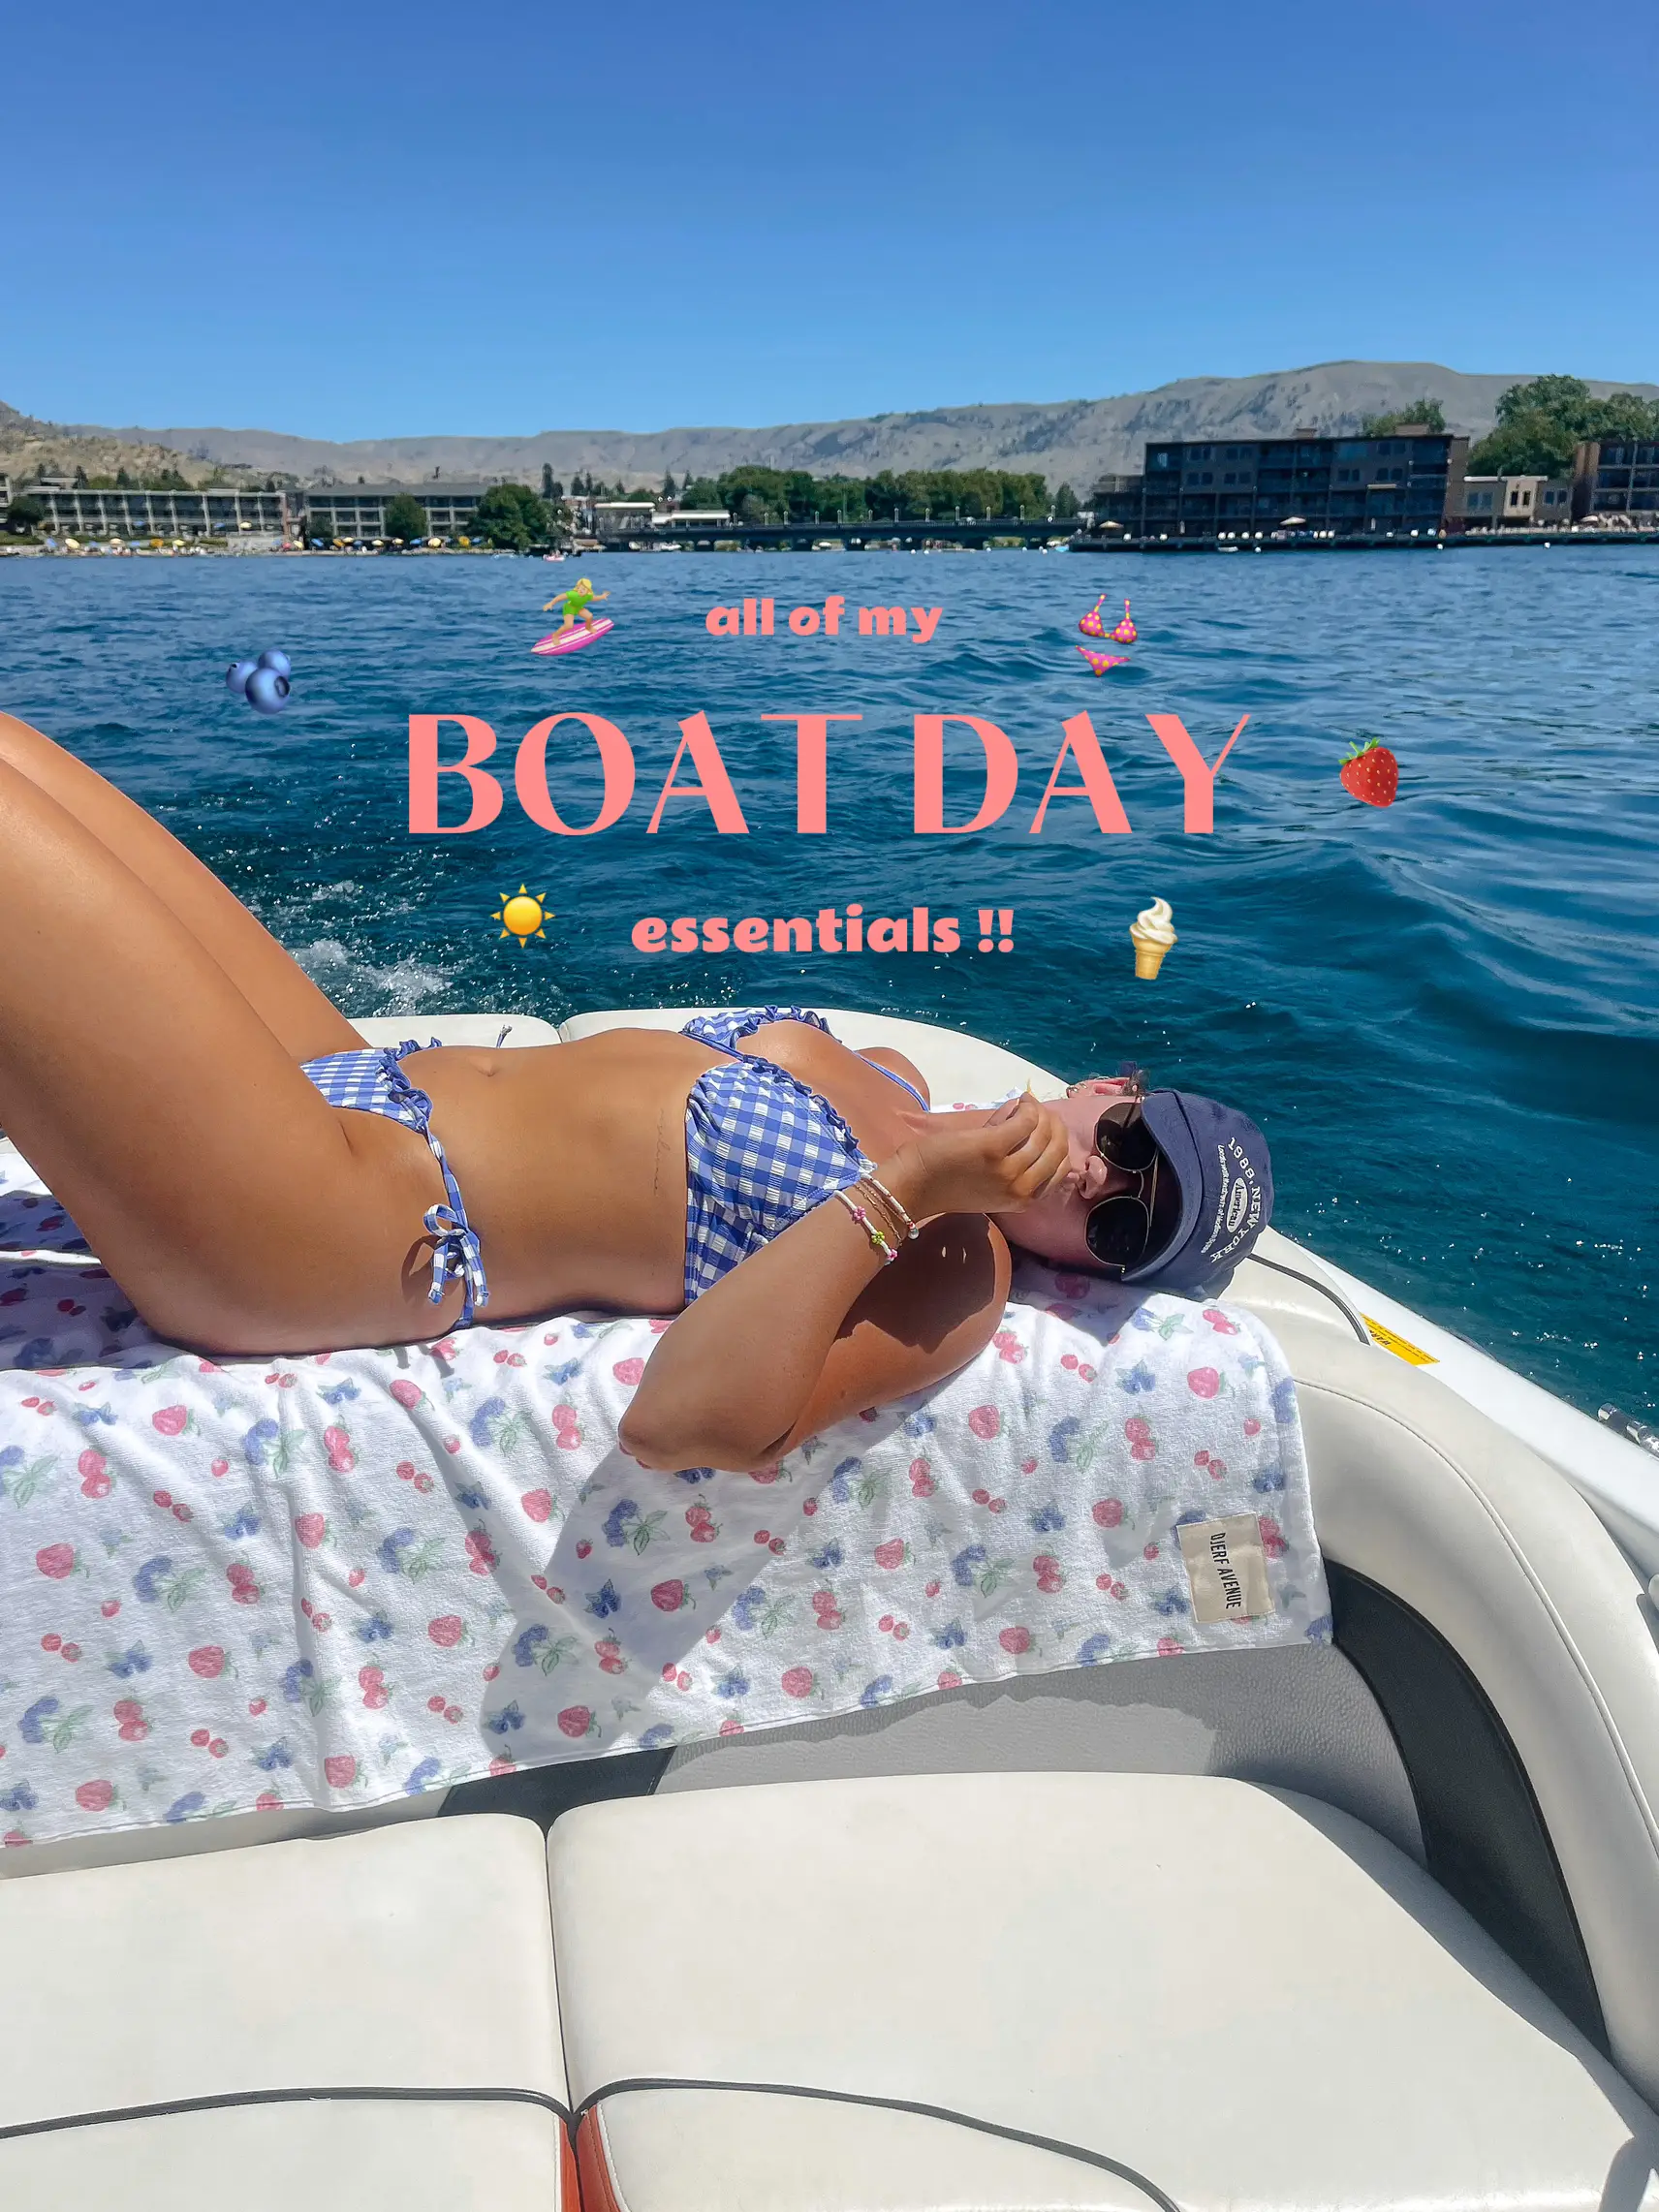 MY BOAT DAY ESSENTIALS ☀️👙🏄🏼‍♀️🌸🍦✨💓, Gallery posted by Shae Pitta